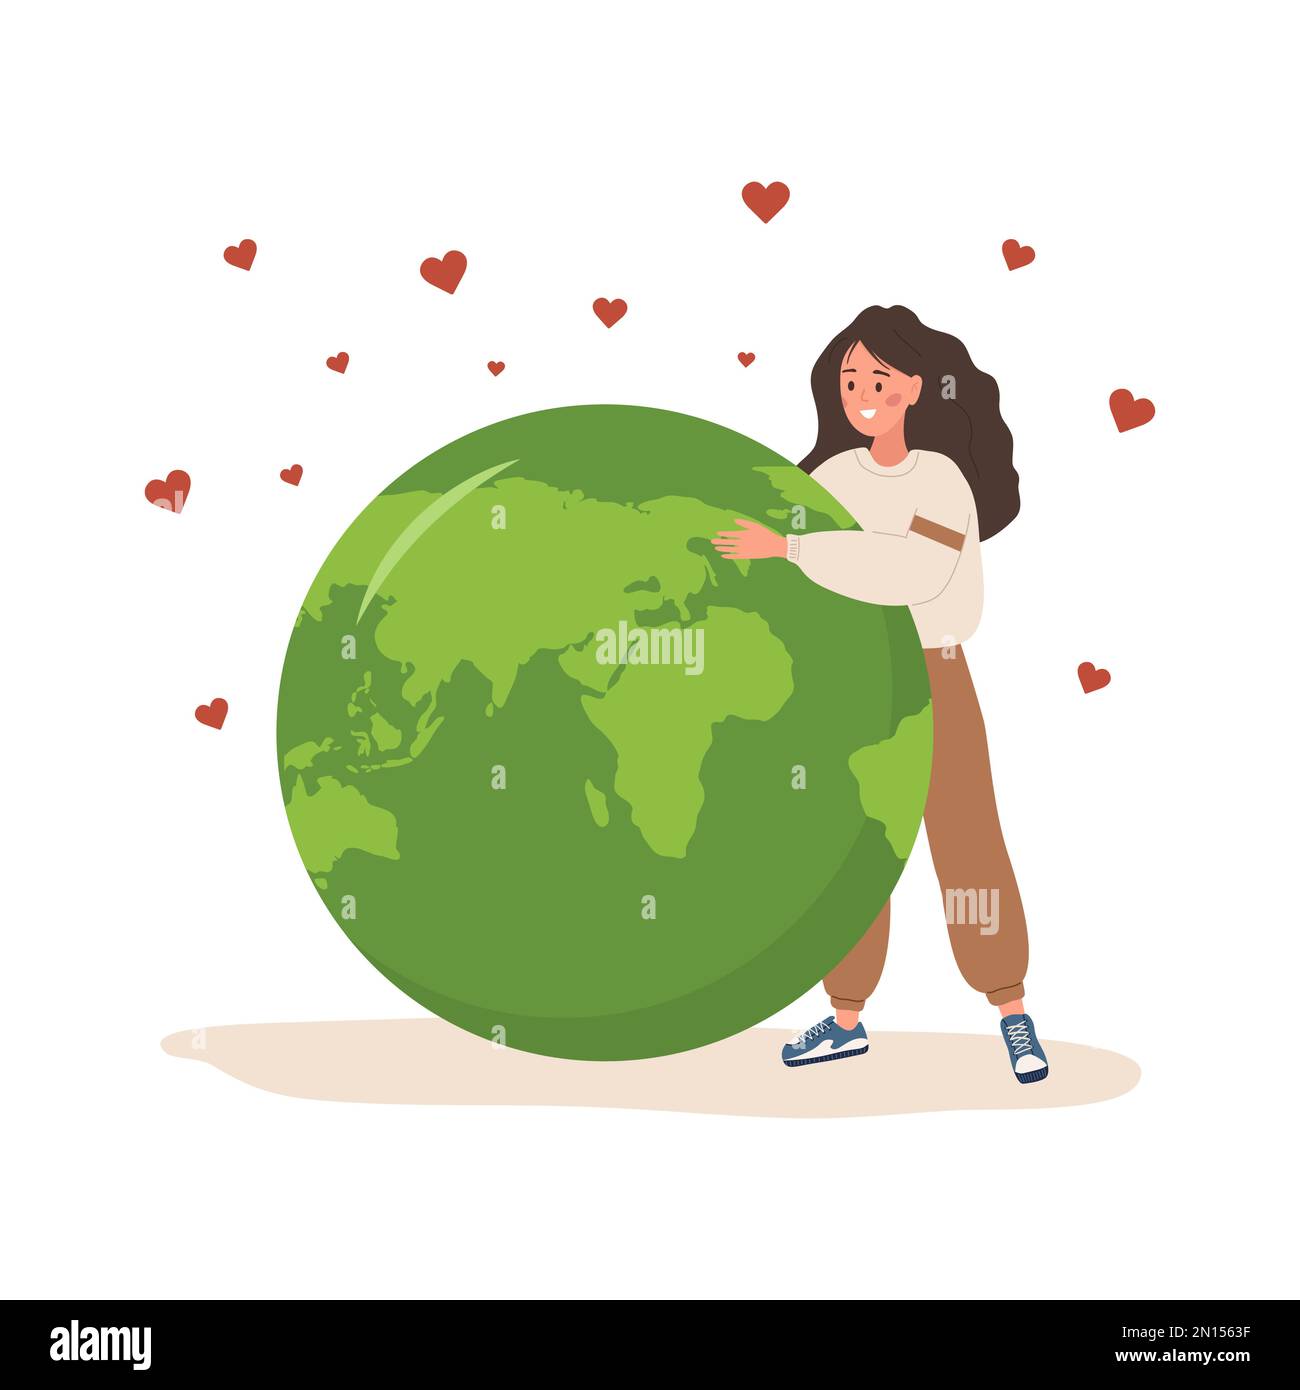 Save the planet concept. Smiling woman next to large globe. International Mother Earth day. Caring for Nature and environment. Vector illustration in Stock Vector